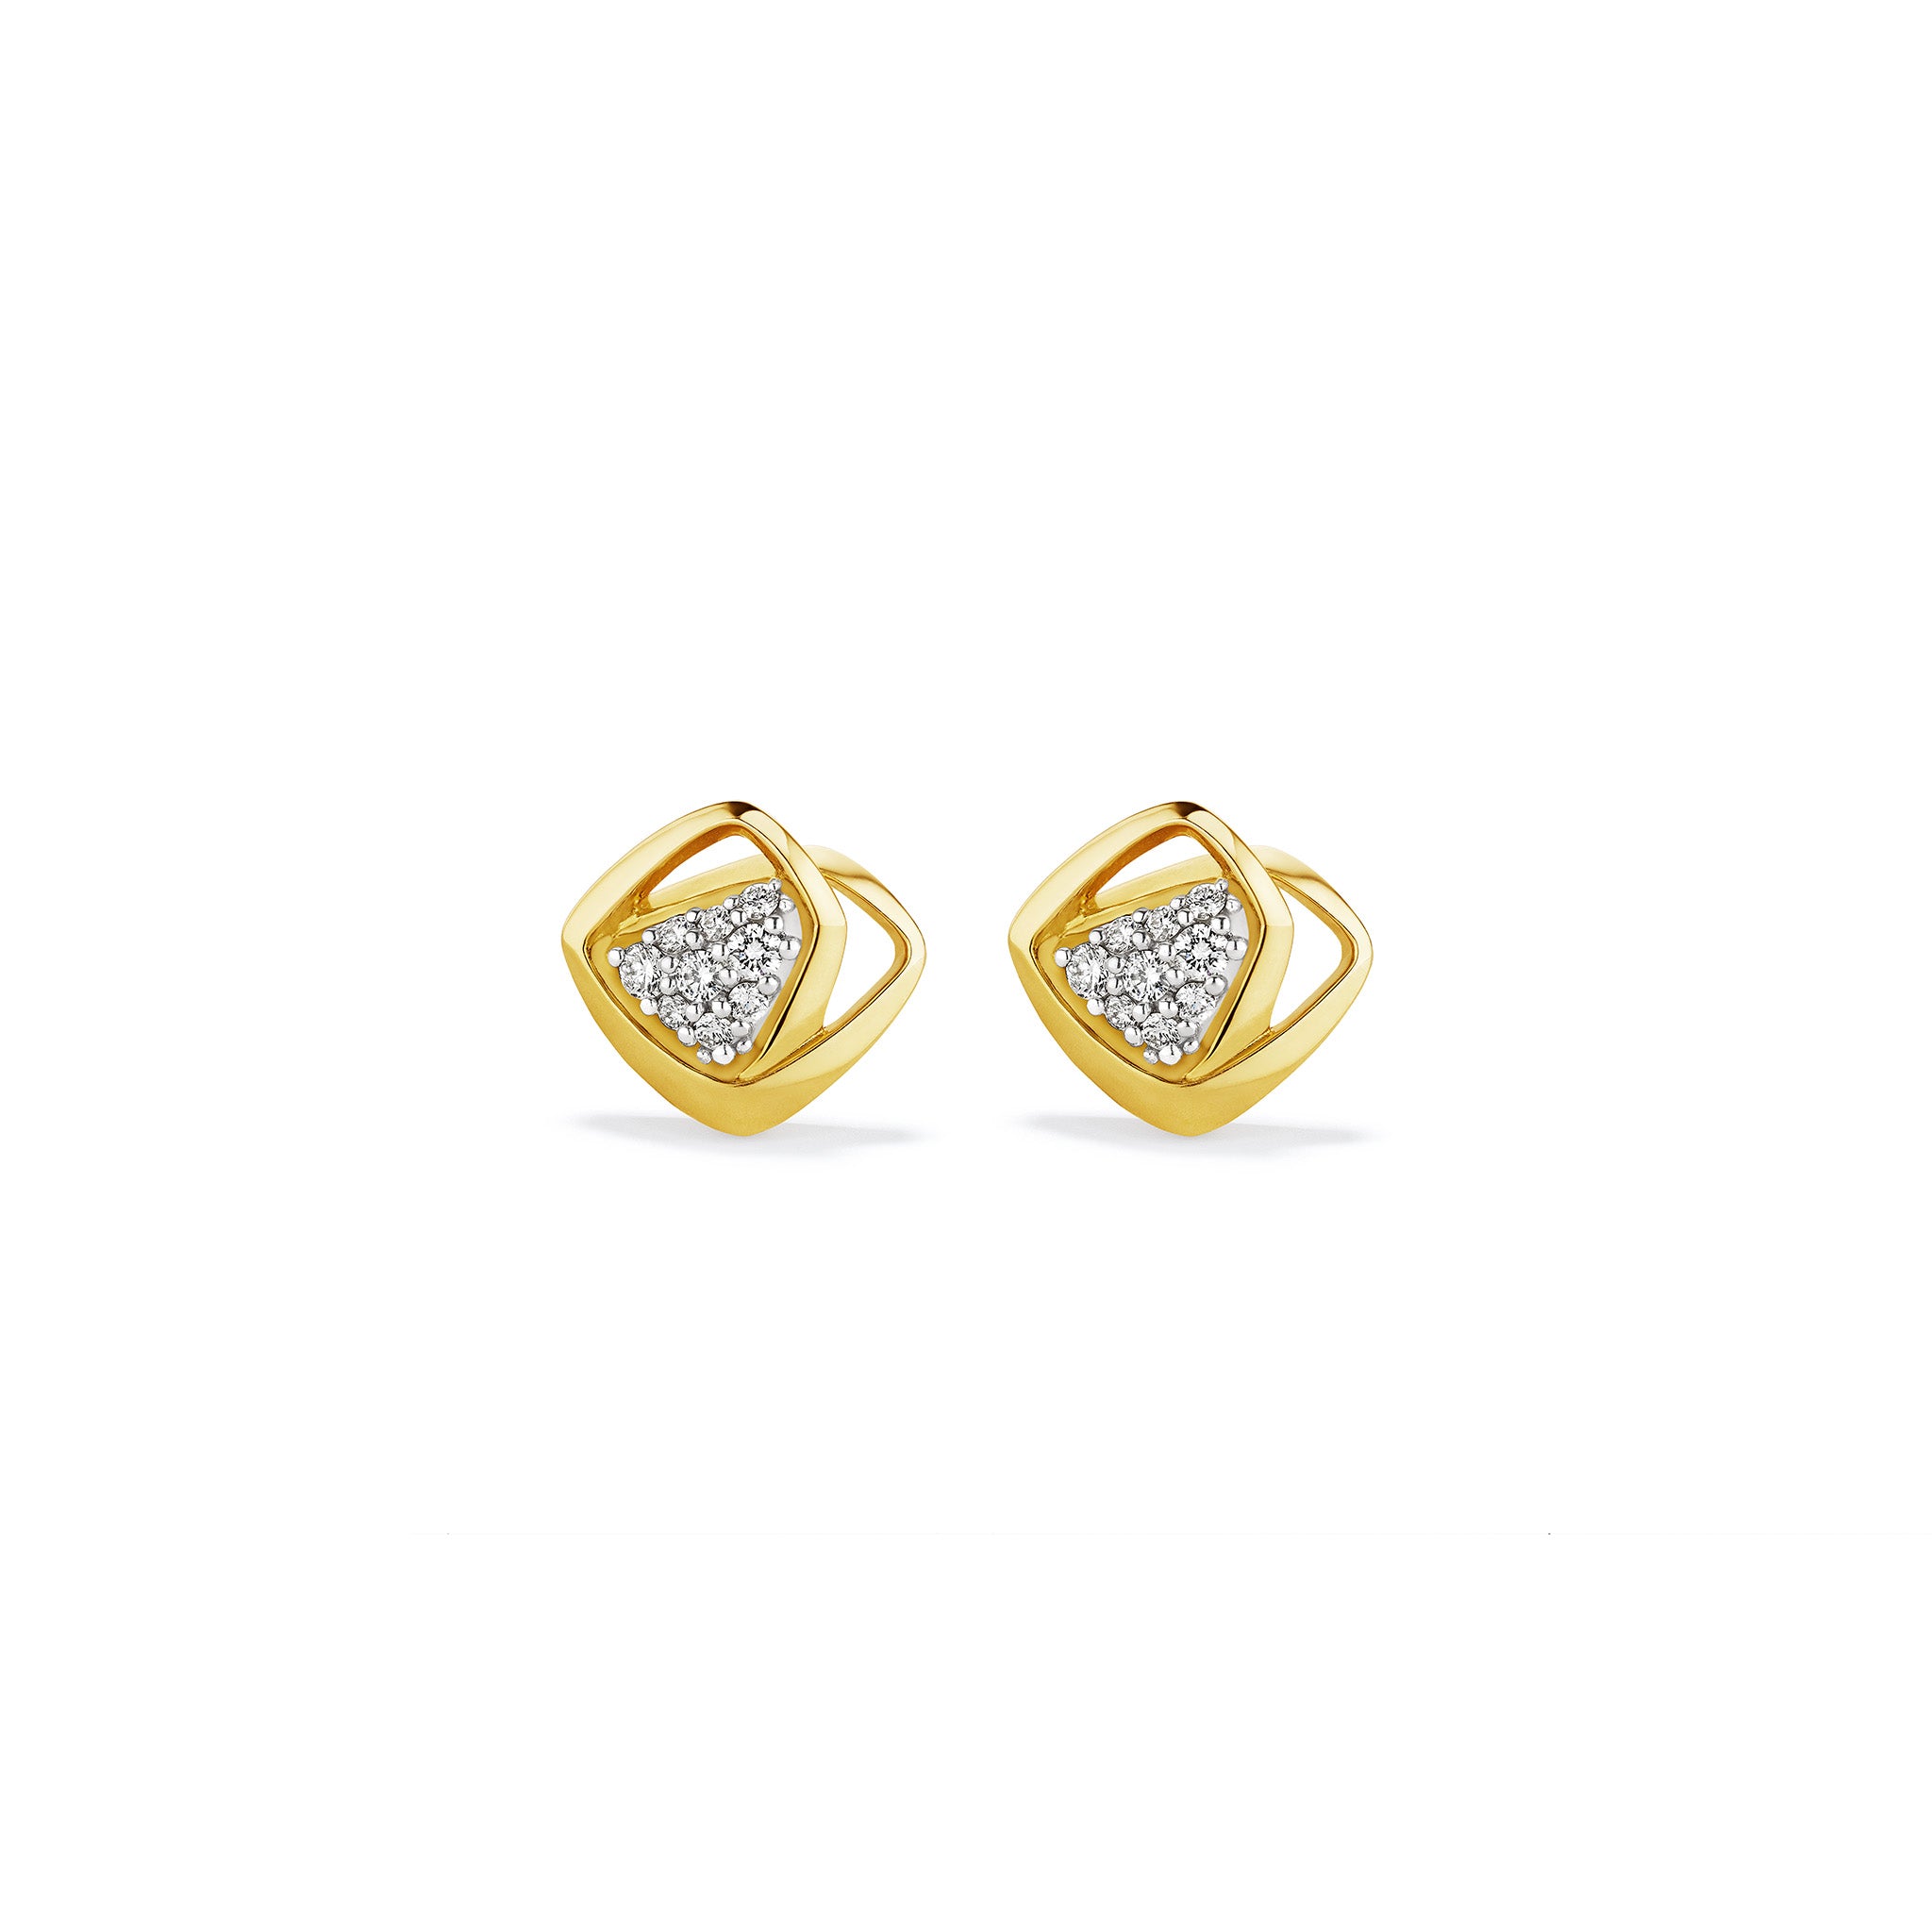 Selvaggia Stud Earrings with Diamonds in 14K